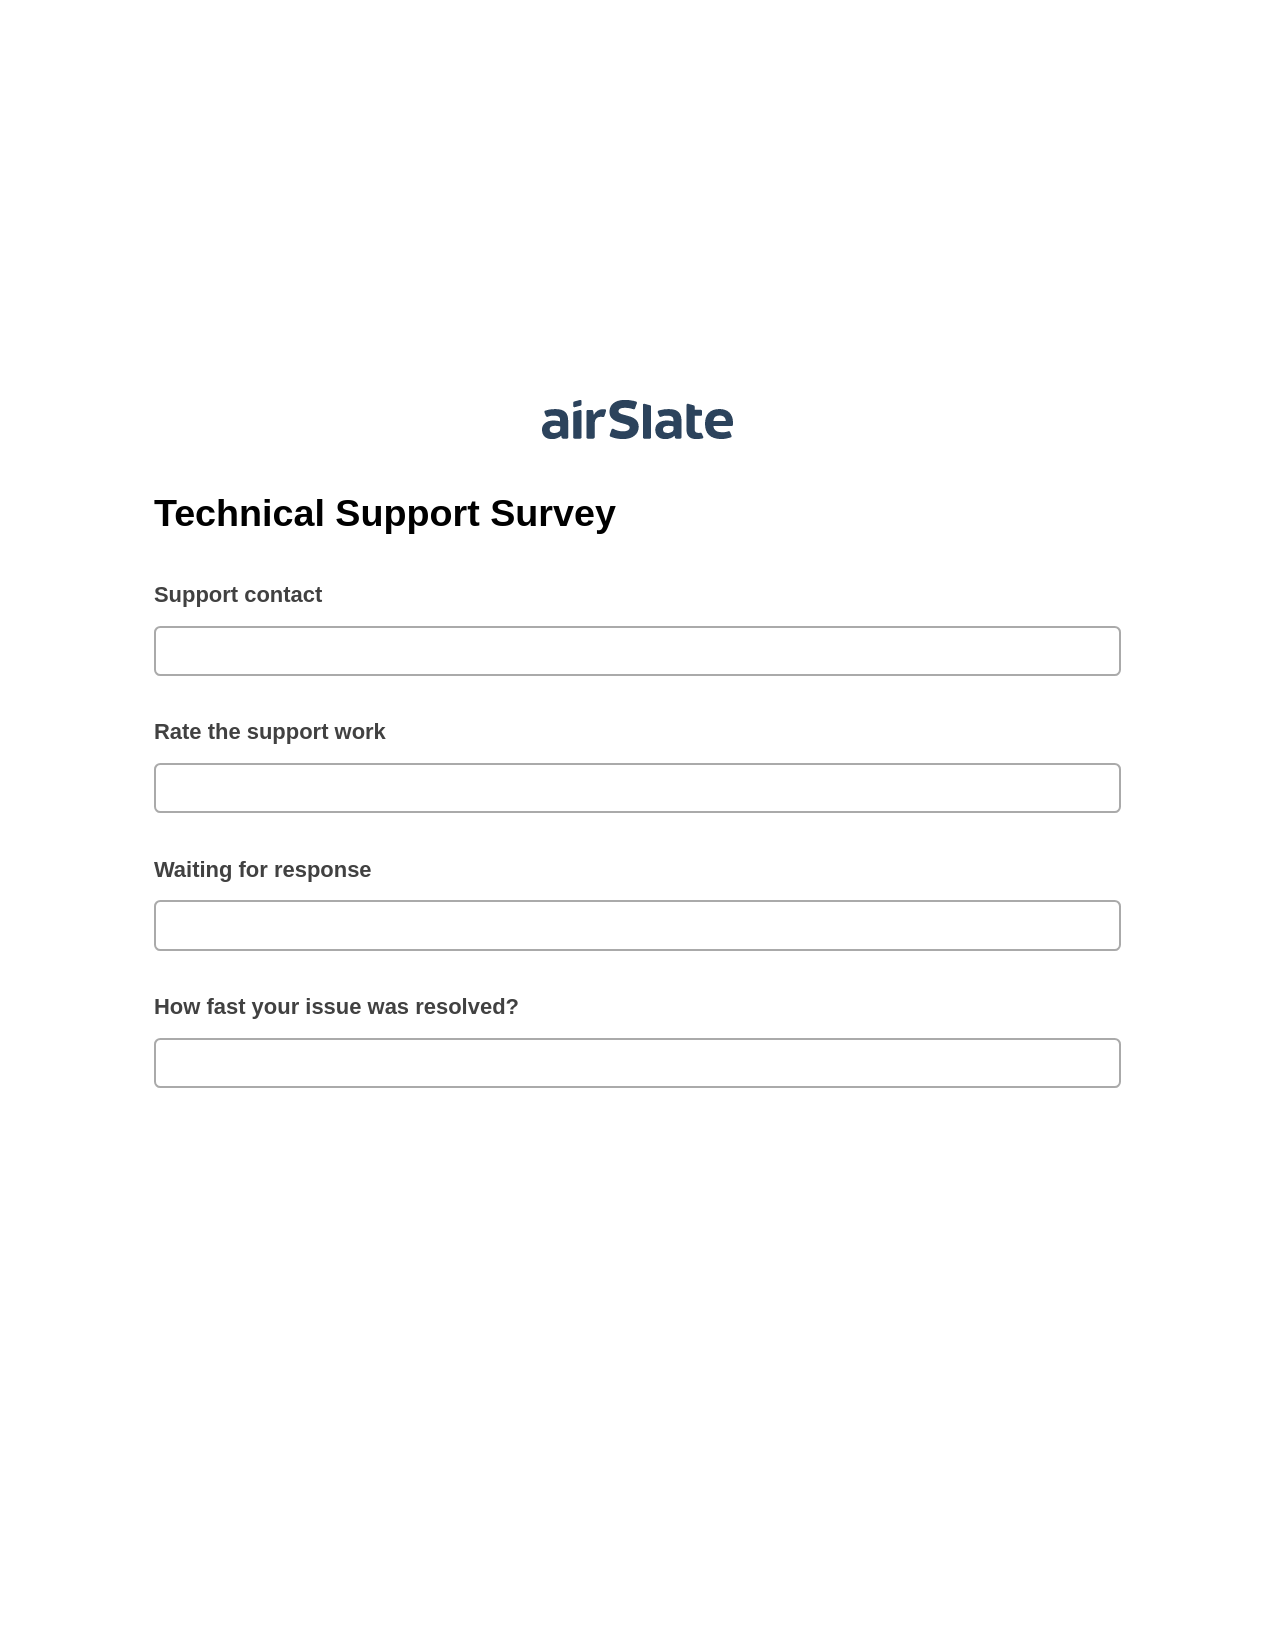 Technical Support Survey Pre-fill from Salesforce Records with SOQL Bot, Create slate from another Flow Bot, Export to Excel 365 Bot